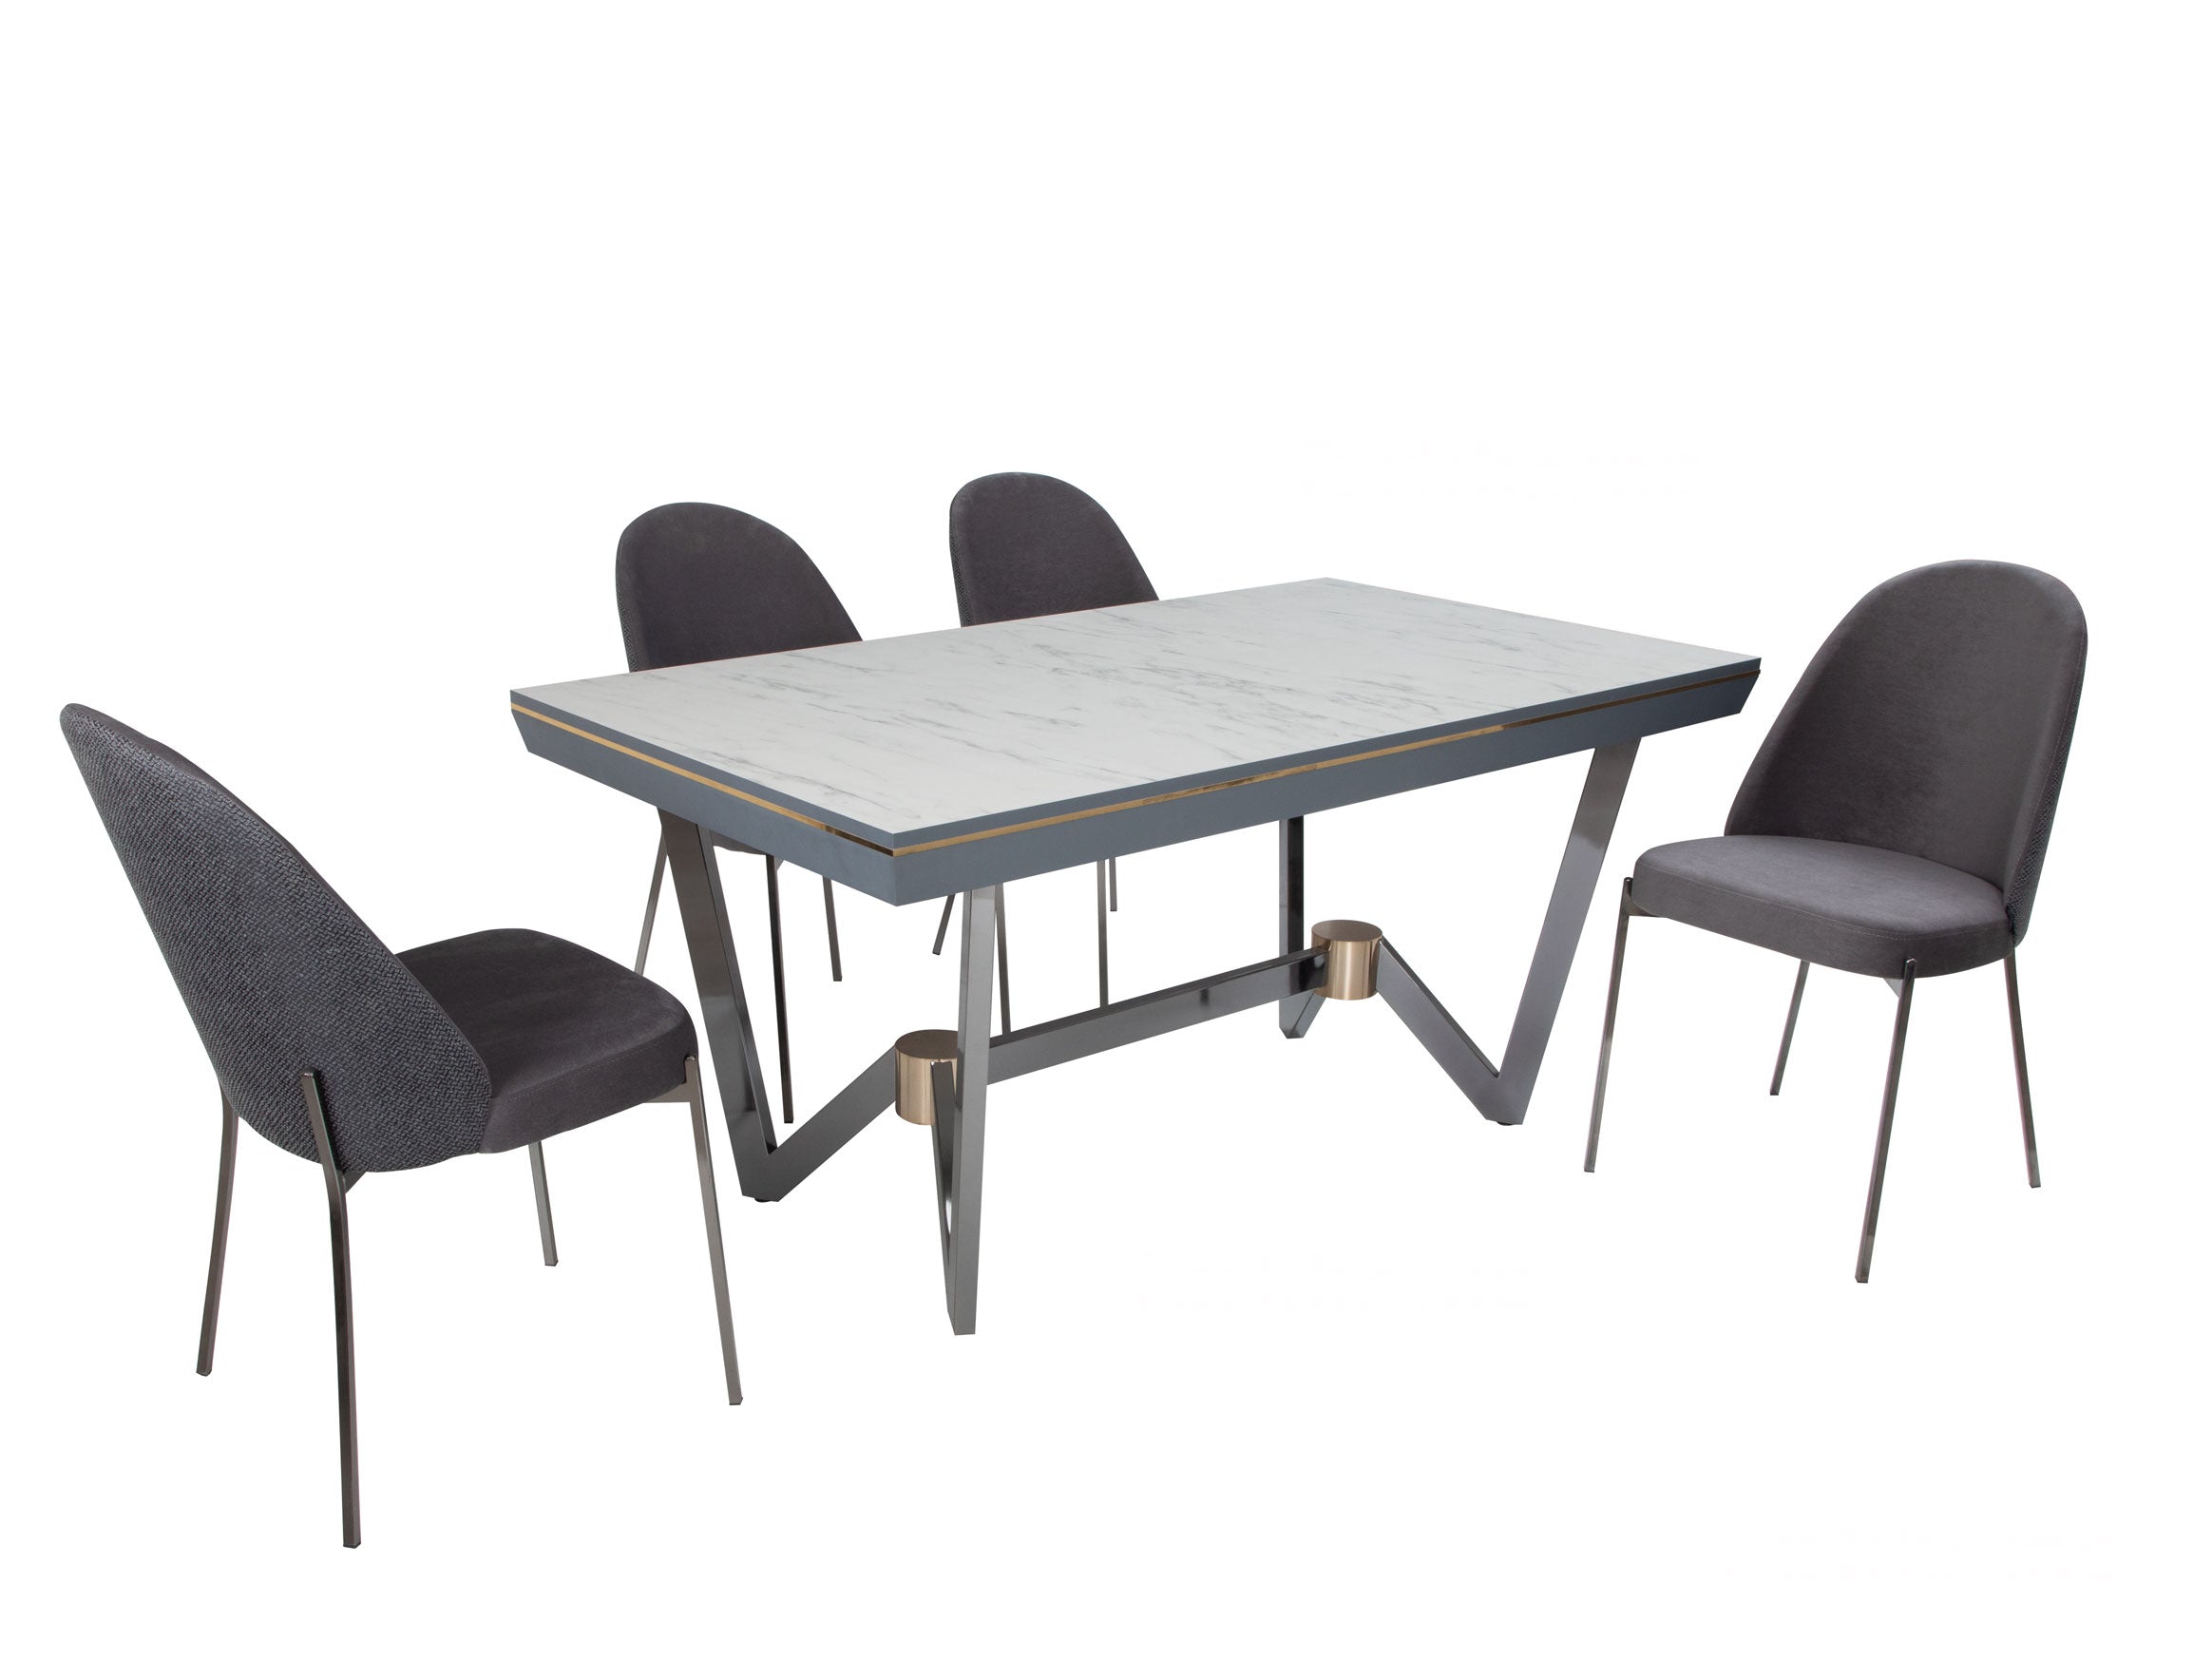 Nevalux Dining Table + 6 Chairs